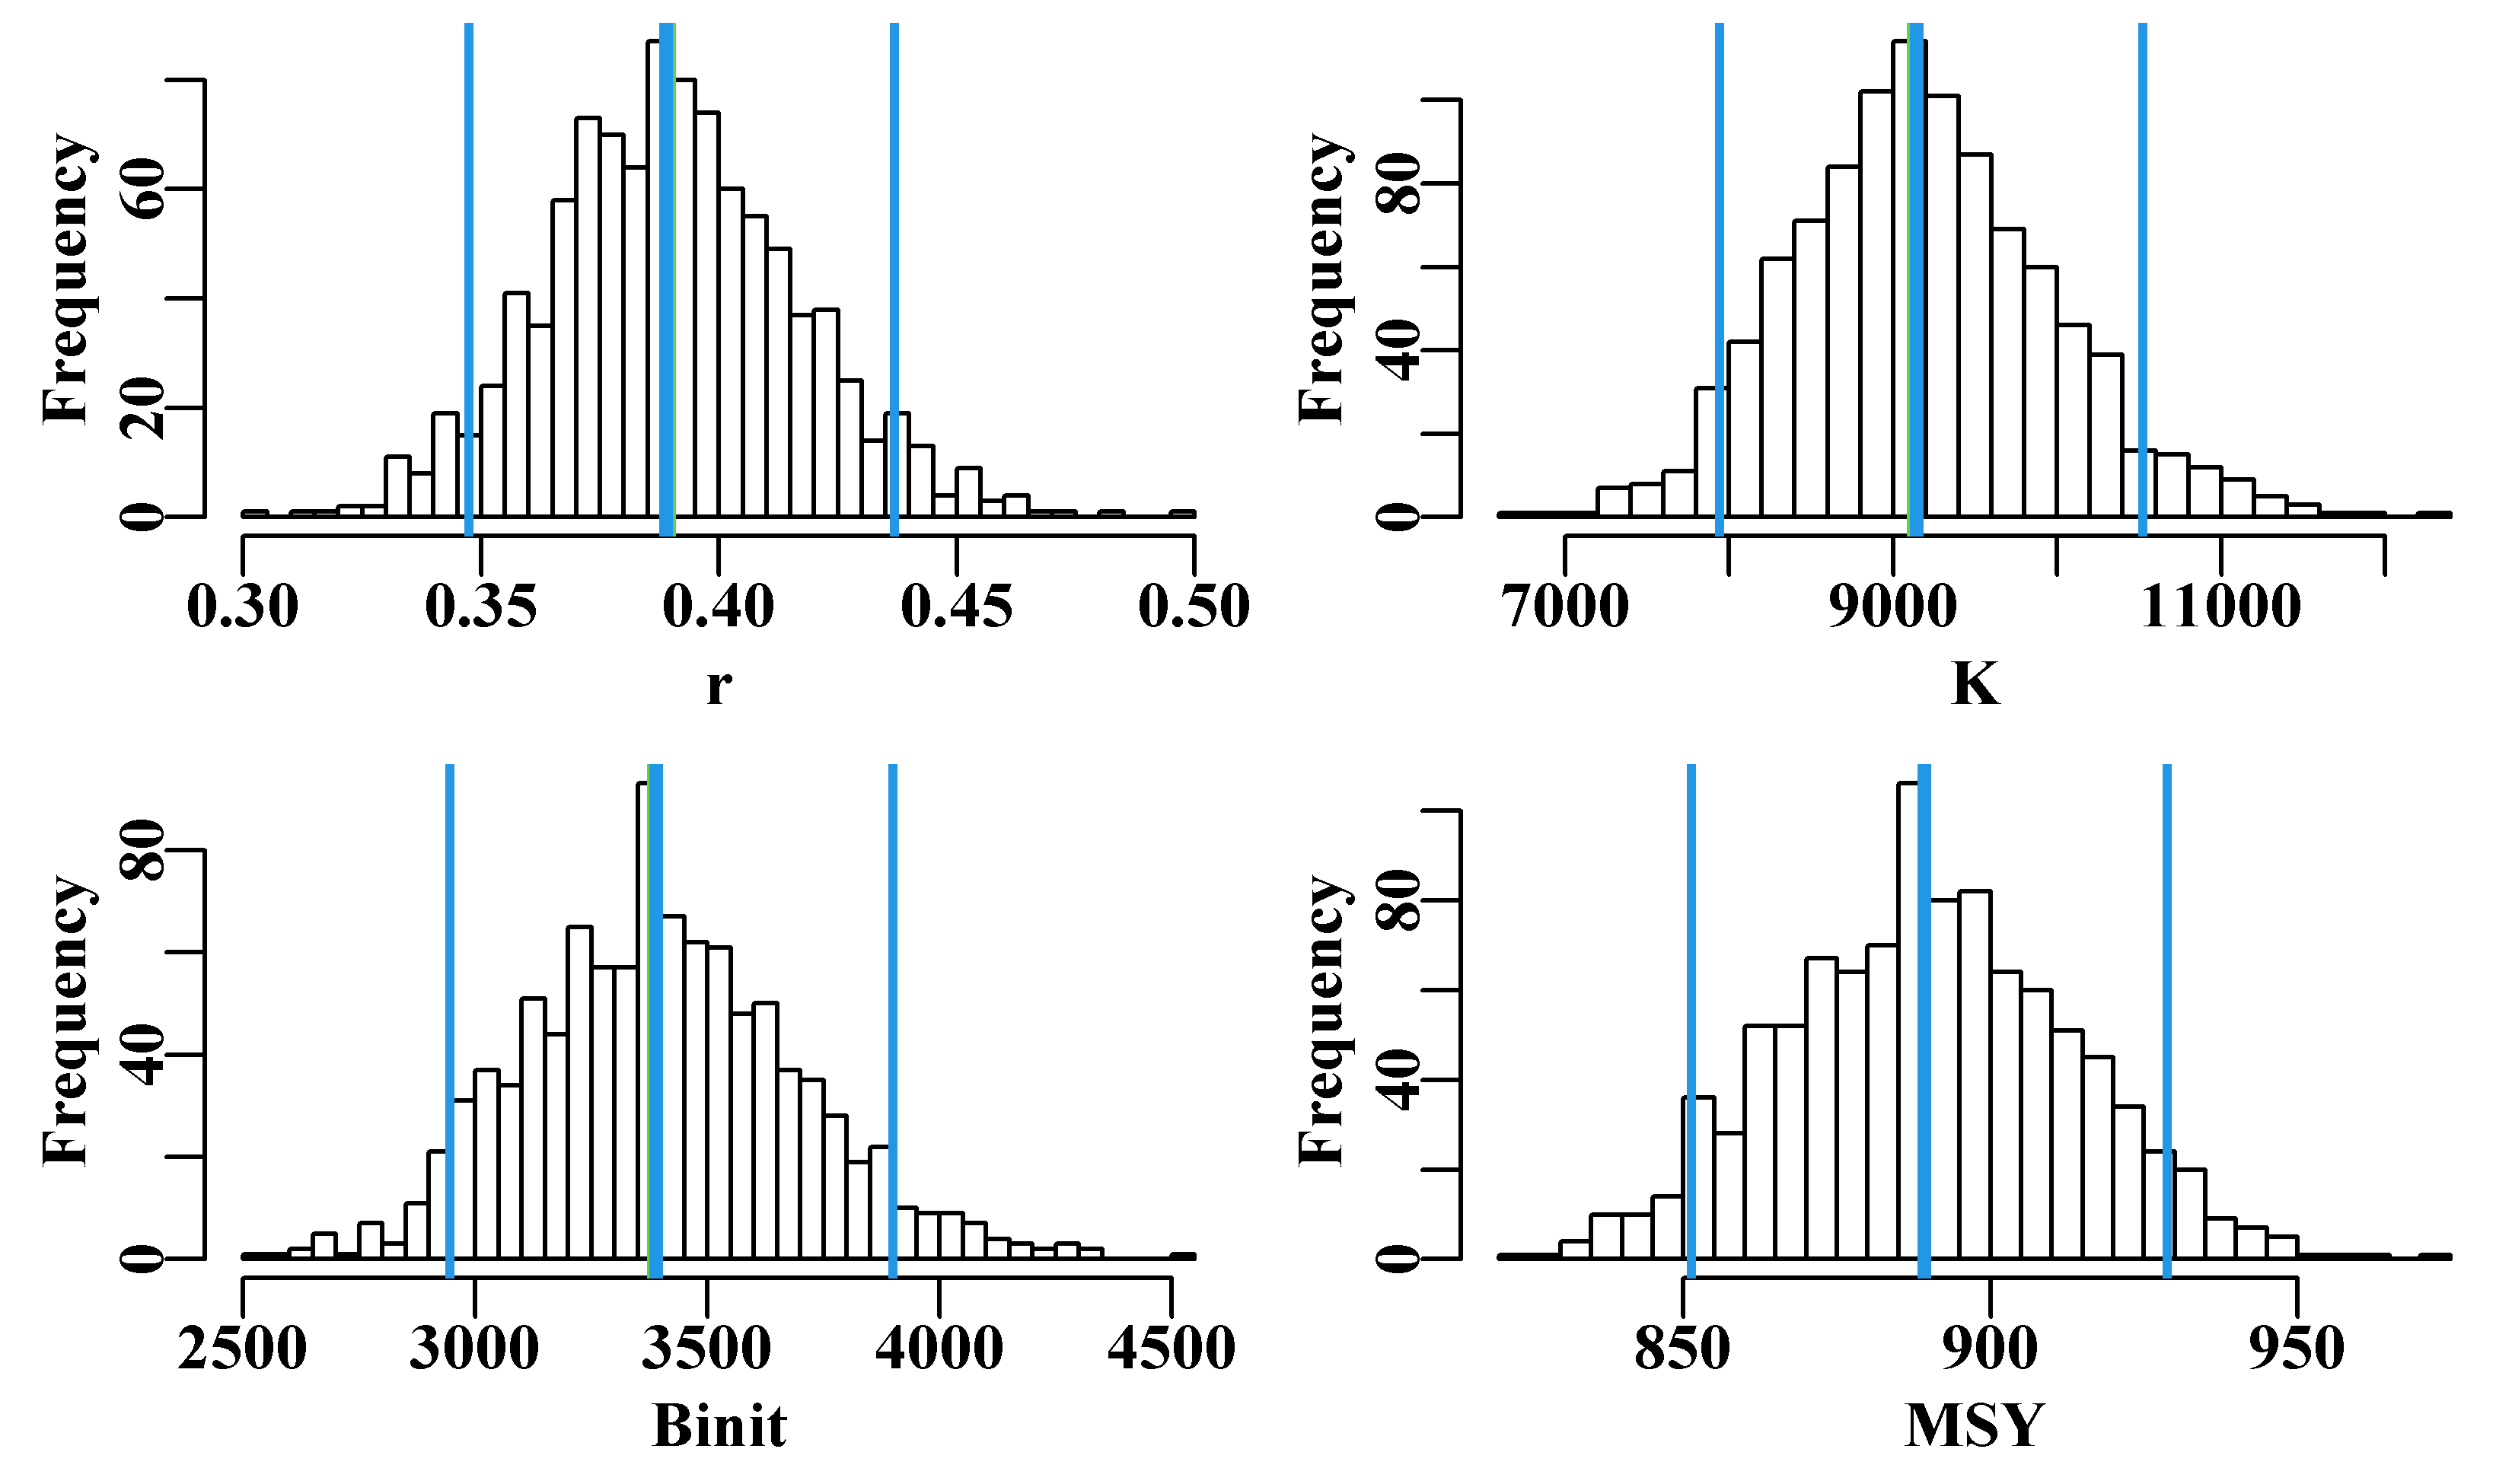 Histograms of the 1000 parameter estimates for r, K, Binit, and the derived MSY, from the multi-variate normal estimated at the optimum solution. In each plot, the green line denotes the arithmetic mean, the thick blue line the median, and the two fine blue lines the inner 90% confidence bounds around the median.